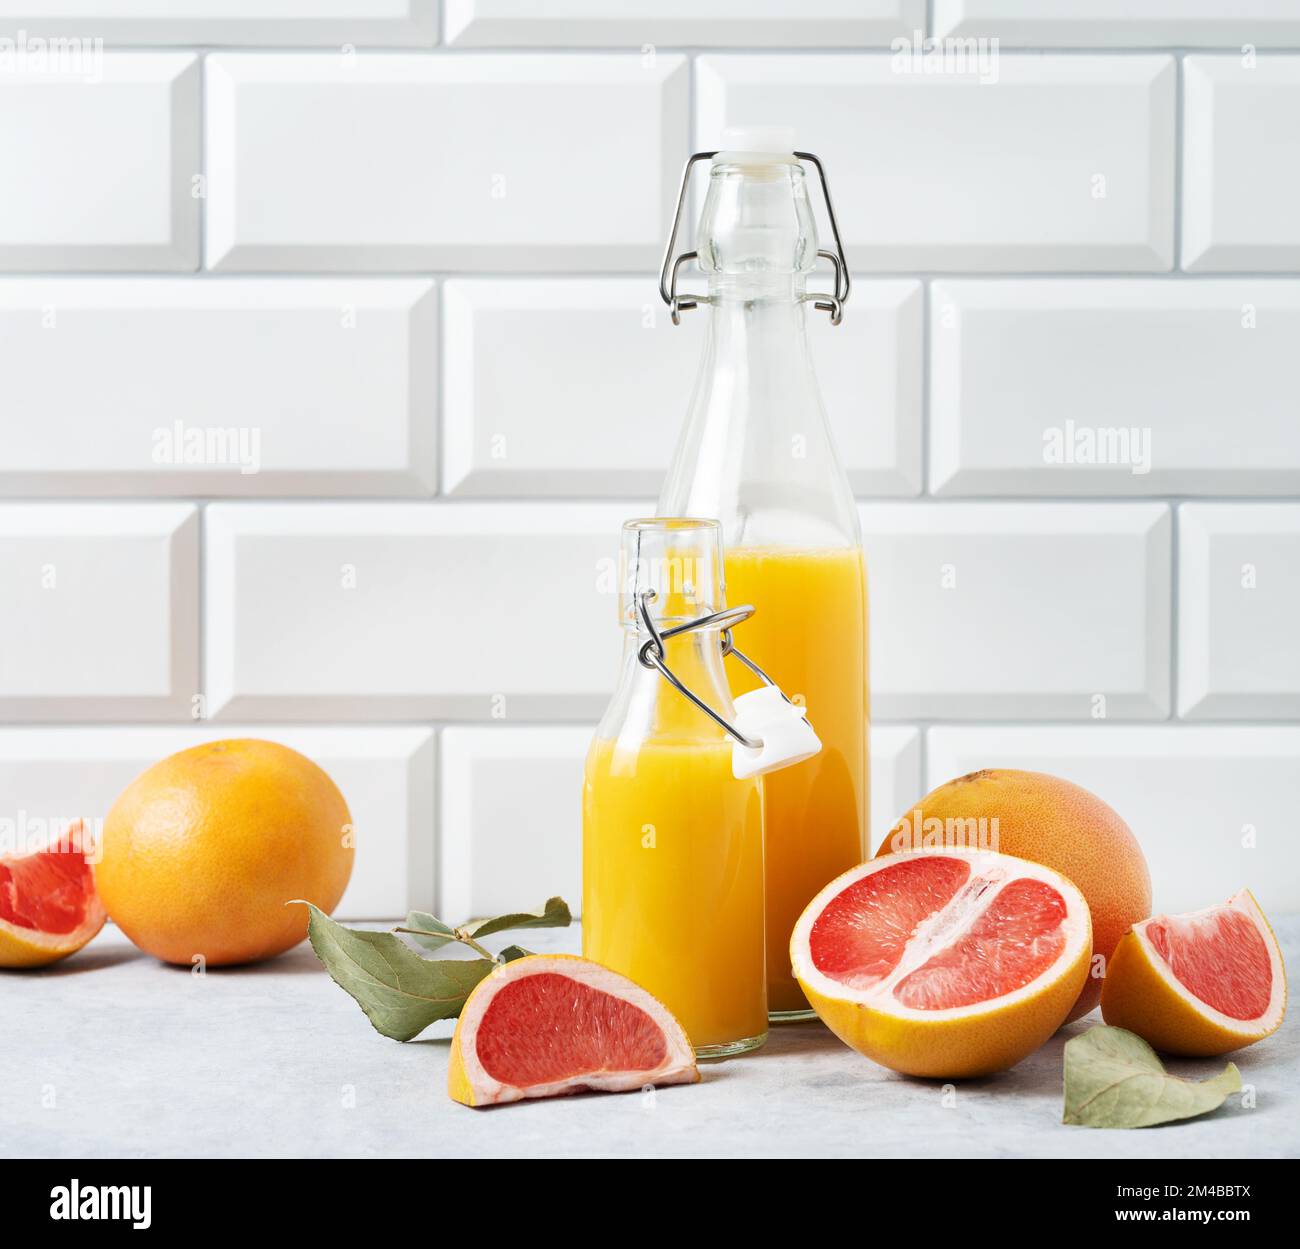 juicy and fresh grapefruit and bottle juice on a blue table on  a white brick background. Concept healthy and diet  food. Front view and copy space. Stock Photo